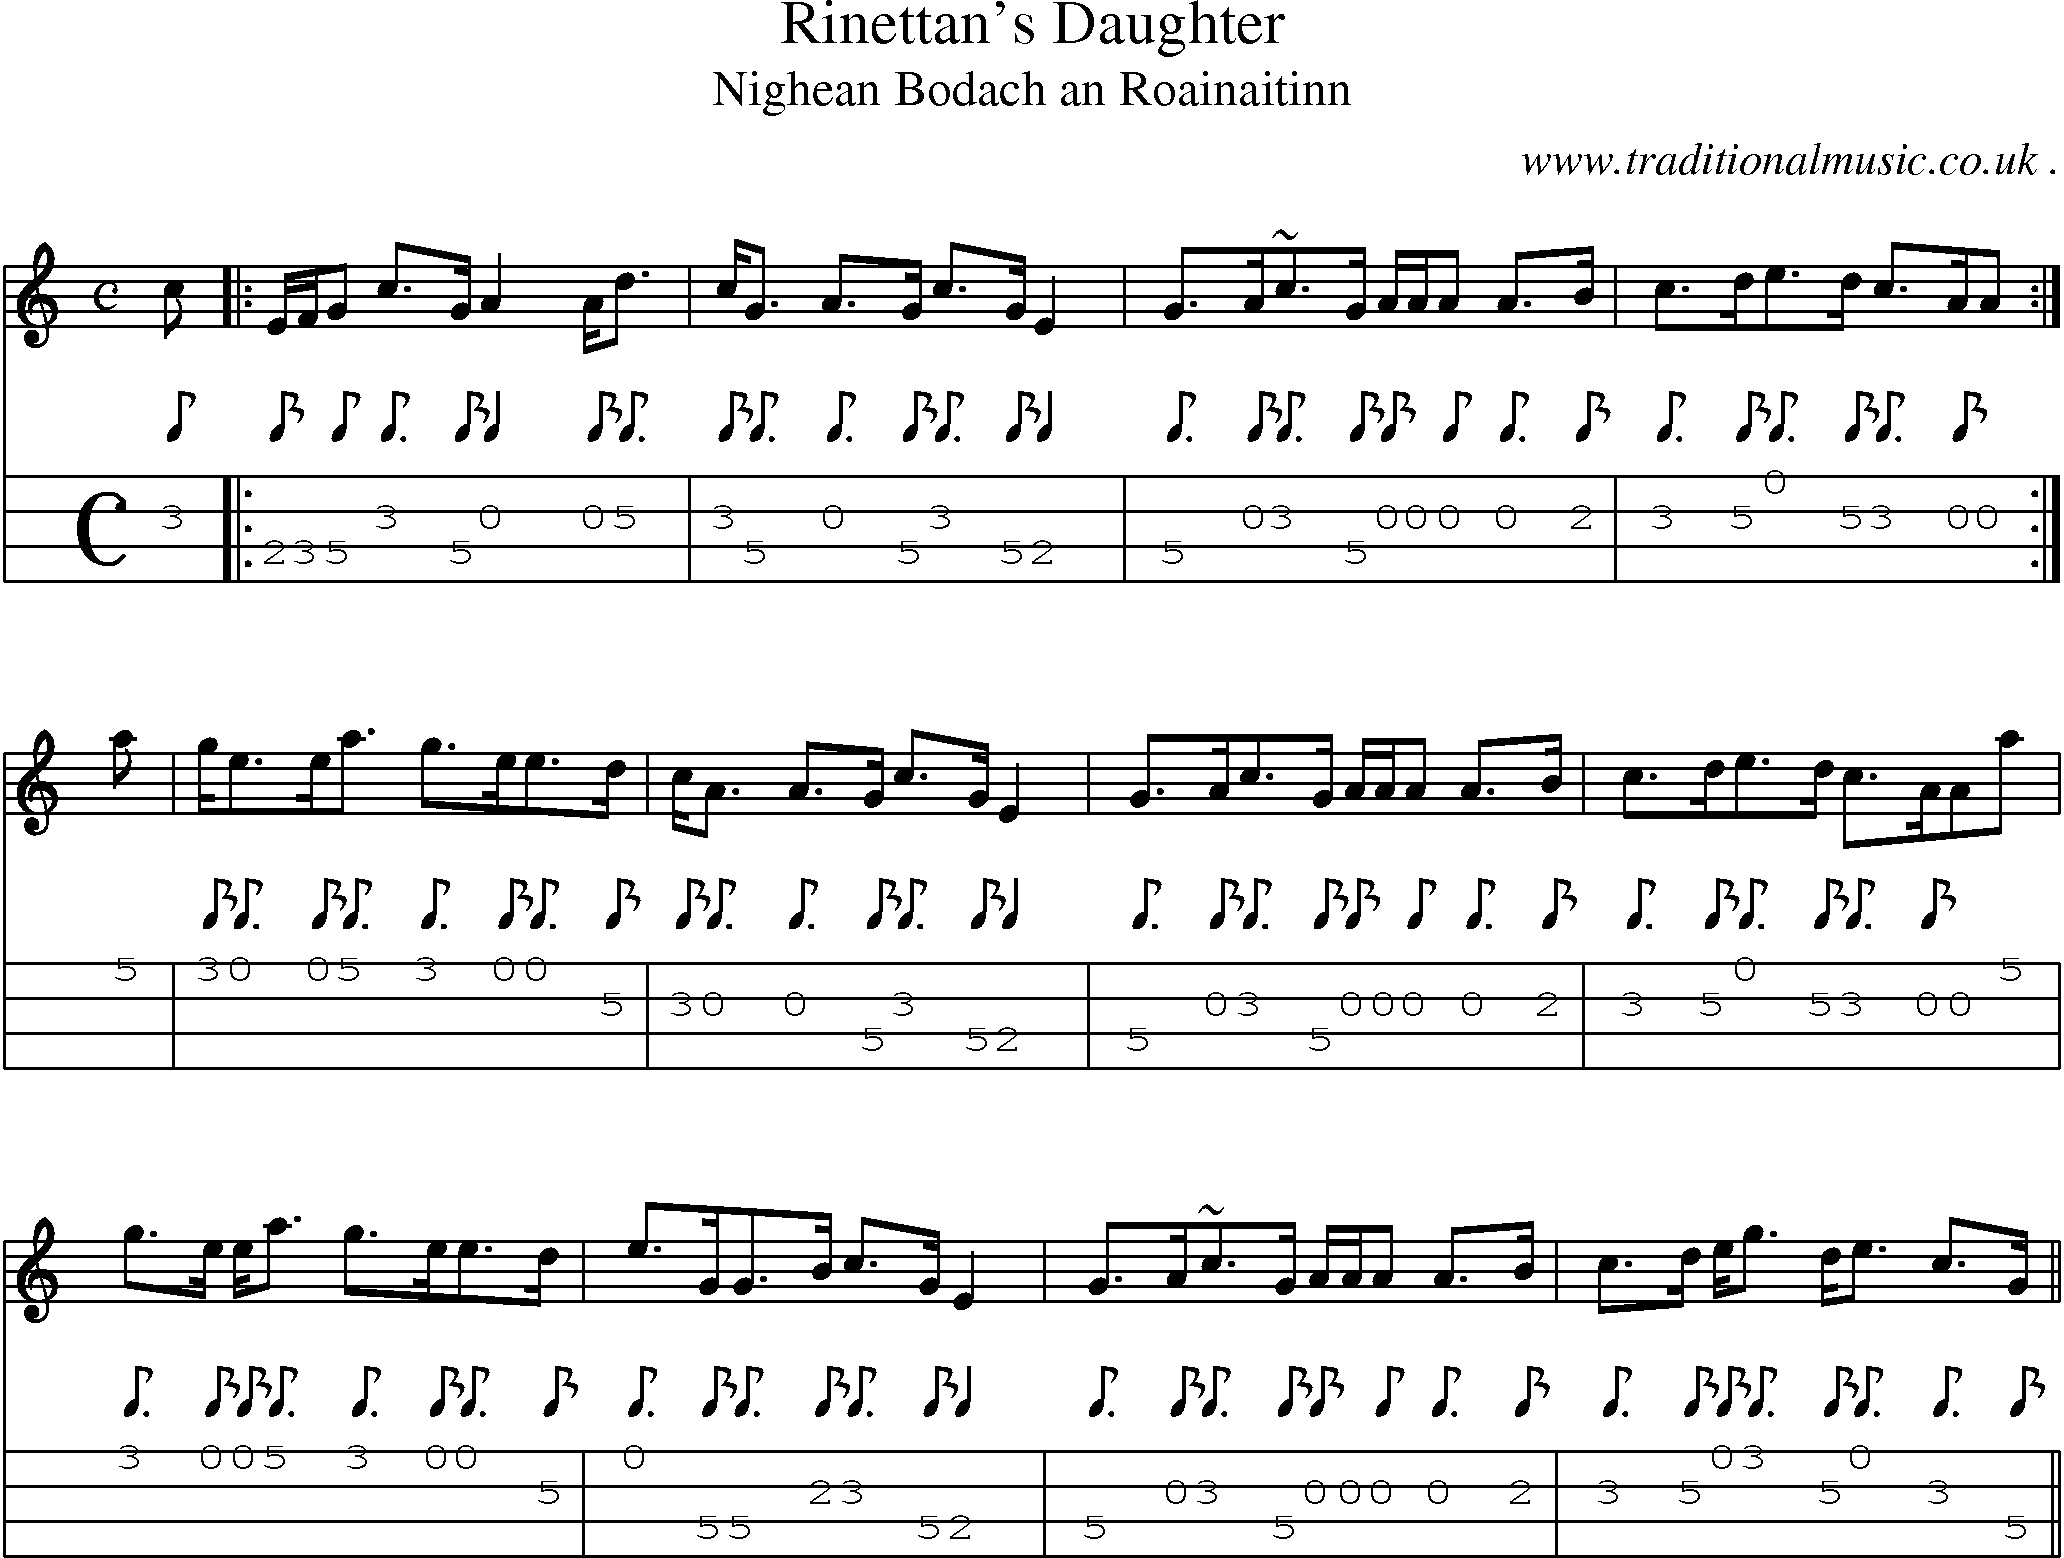 Sheet-music  score, Chords and Mandolin Tabs for Rinettans Daughter